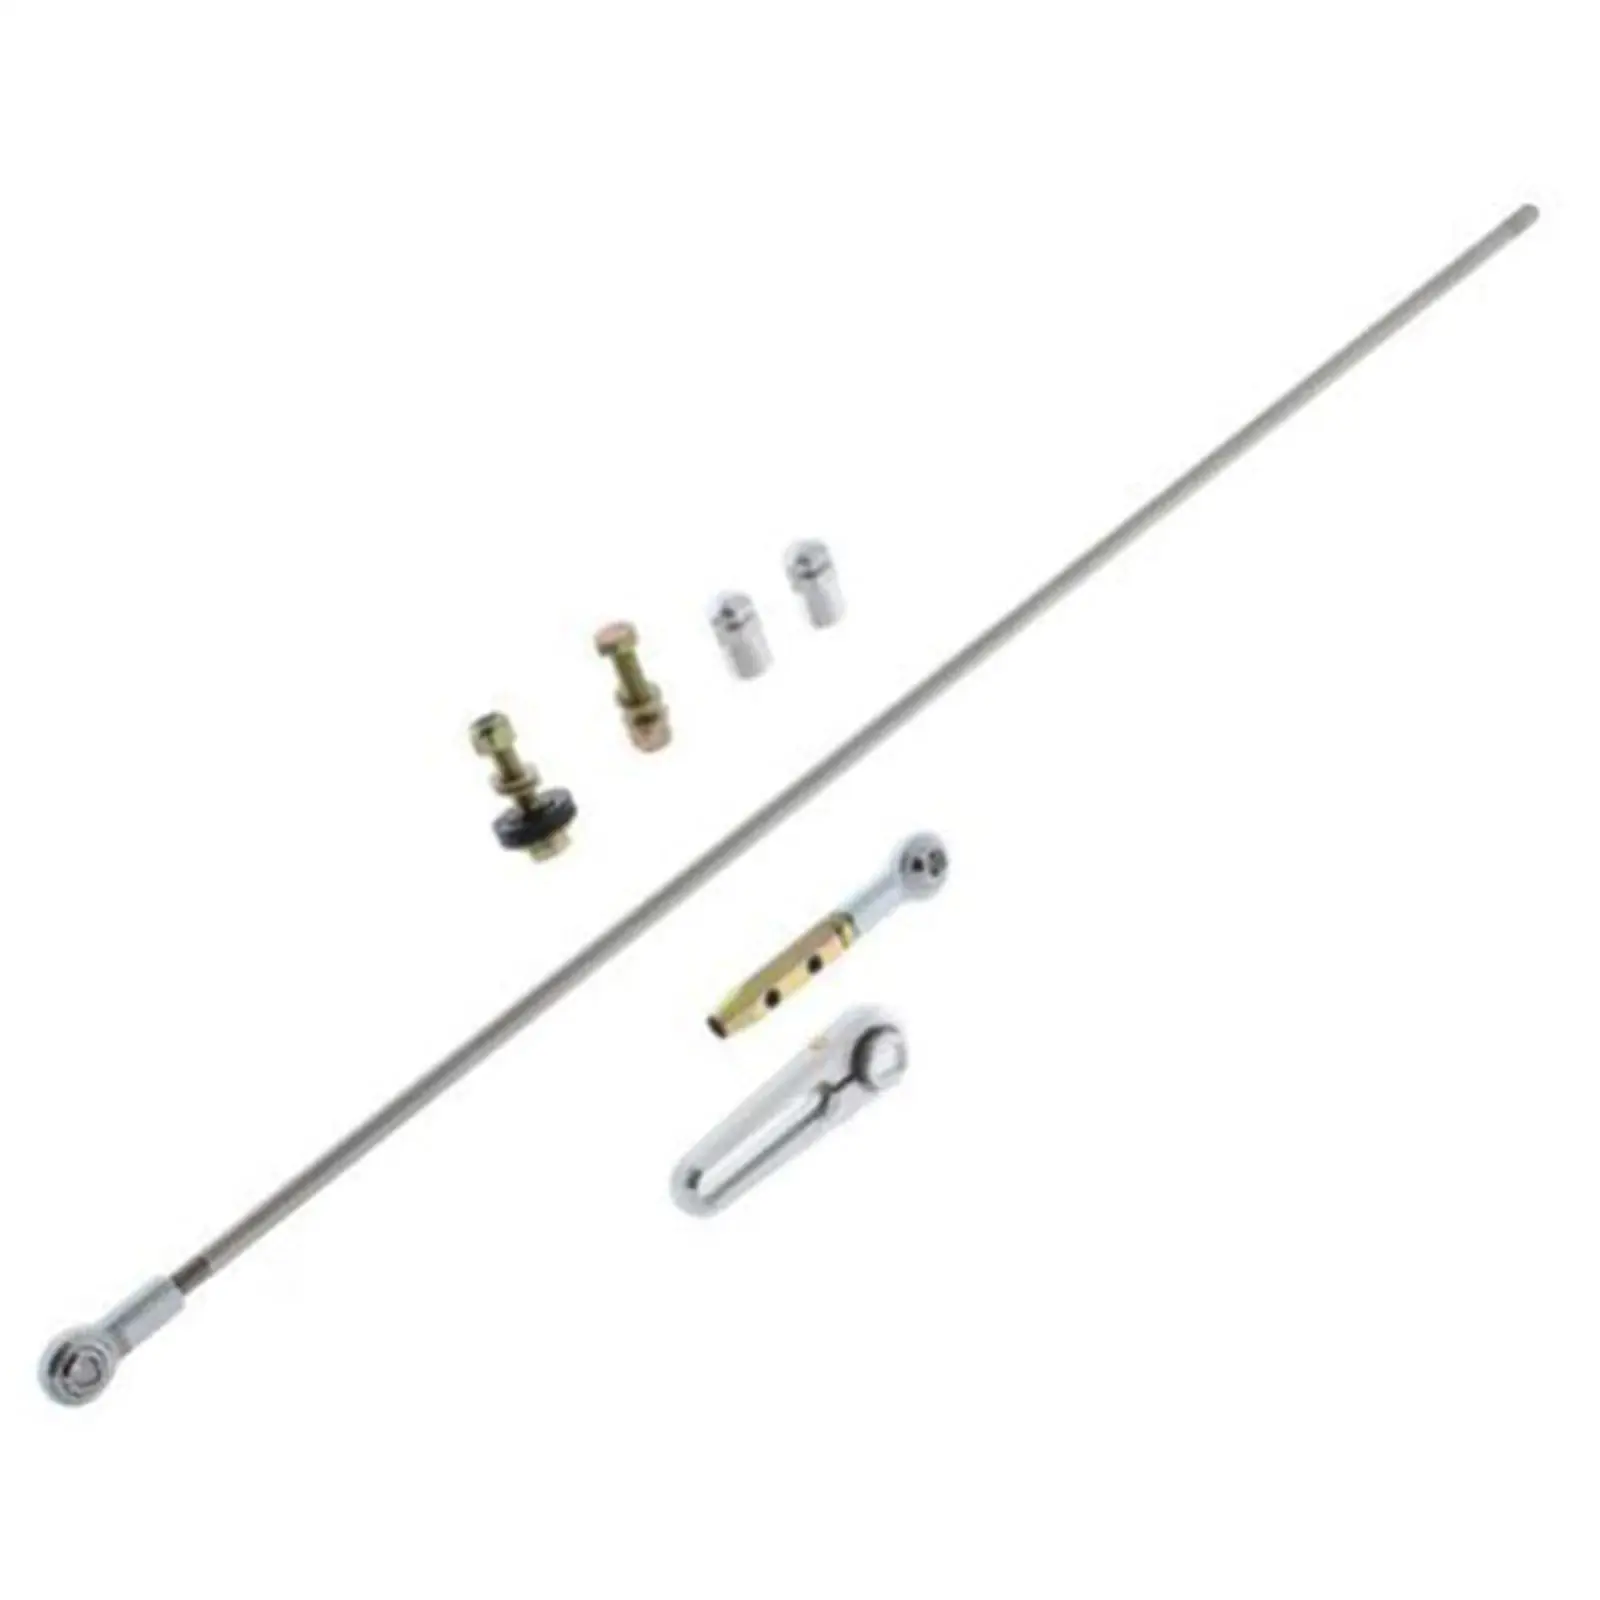 Transmission Shift Linkage Kit Adjustable Spare Parts Durable Easy to Mount Automotive Accessory Replaces for GM 700R4 4L60